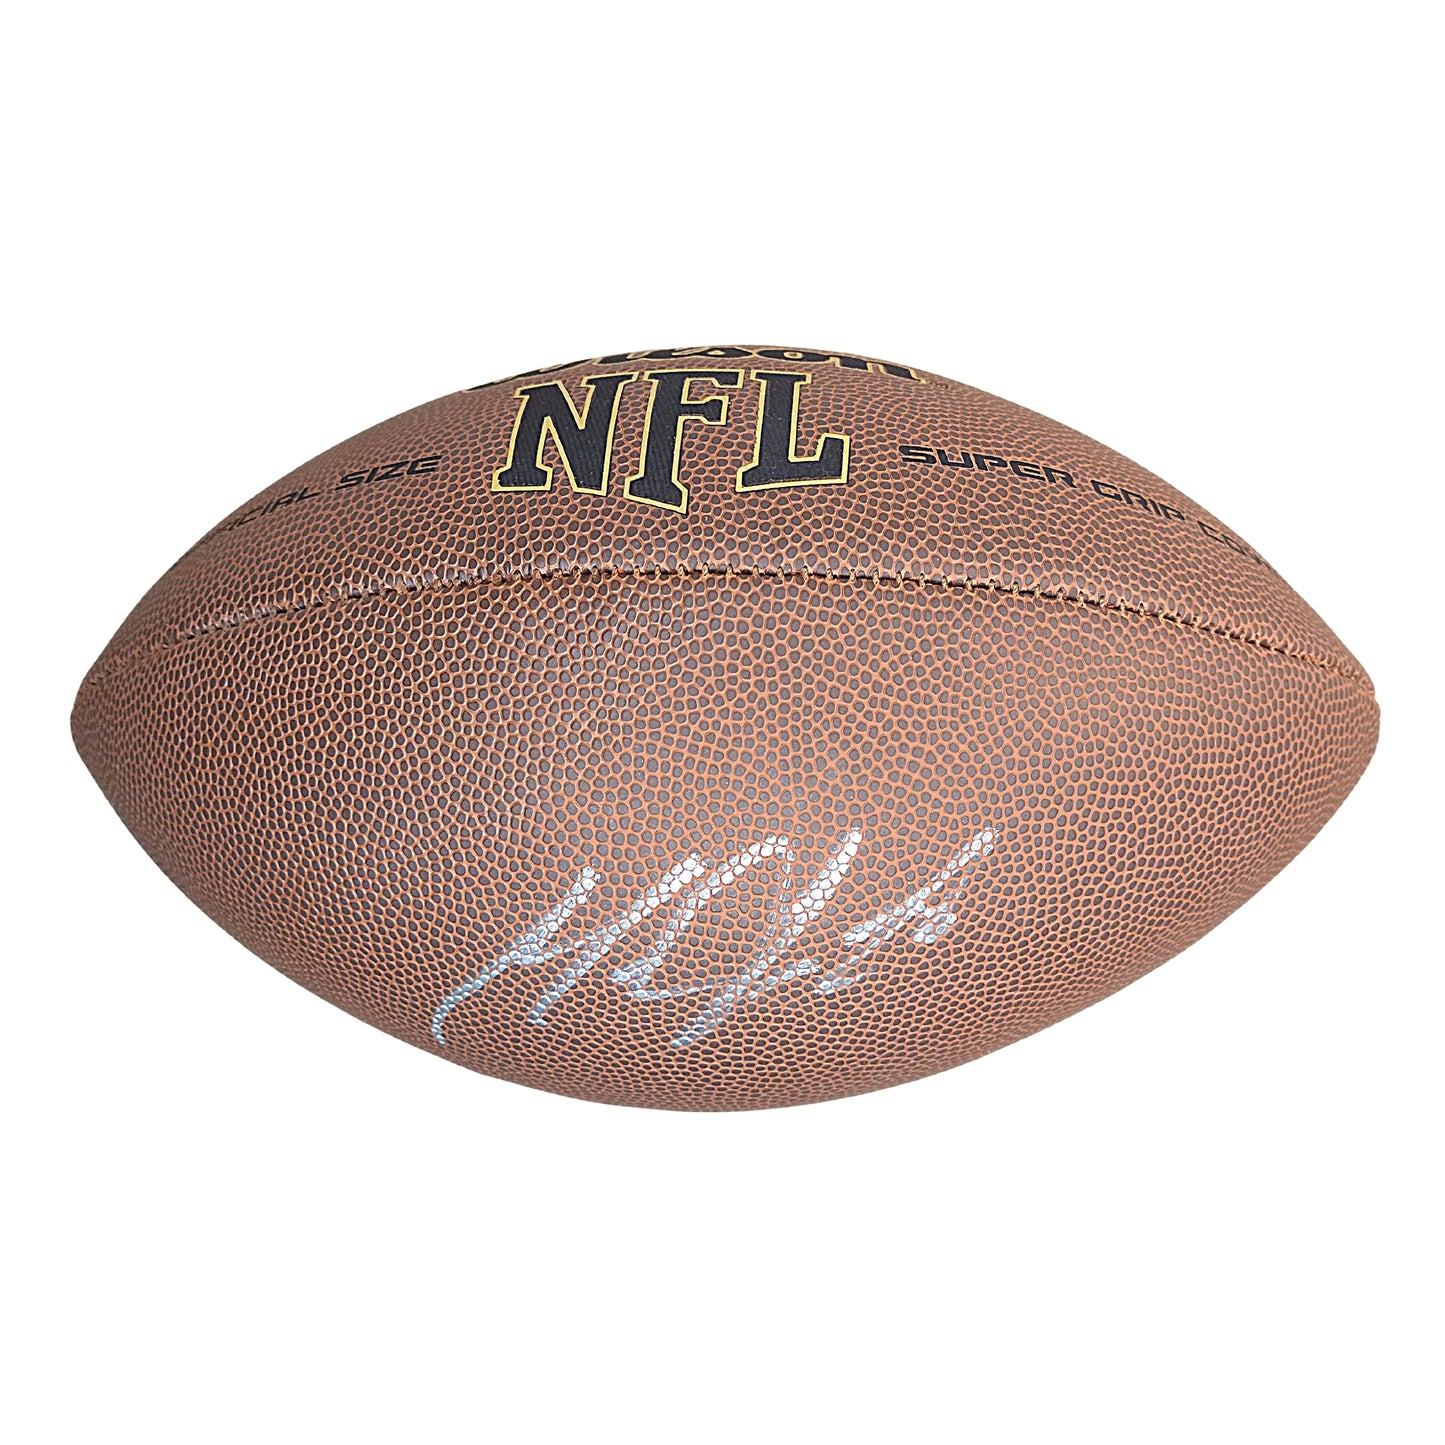 Footballs- Autographed- Melvin Gordon Signed NFL Football - Denver Broncos- Los Angeles Chargers- Wisconsin Badgers- Proof Photo- JSA Authentication - 101